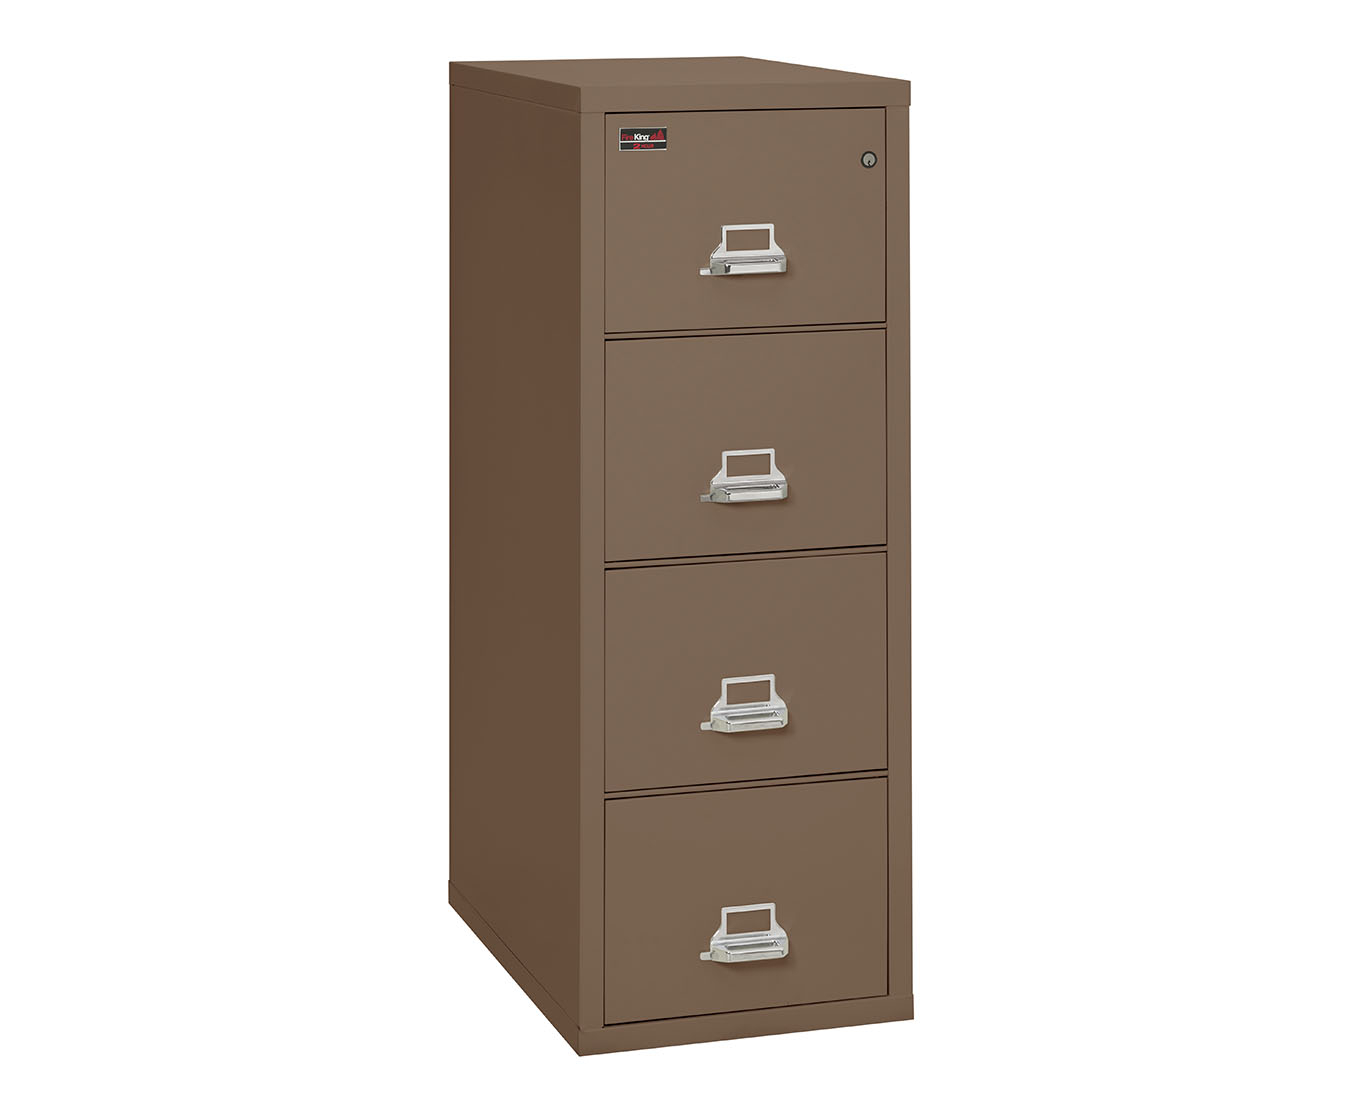 Fireproof File Cabinets 2 Hour Rated Fireking within size 1366 X 1110